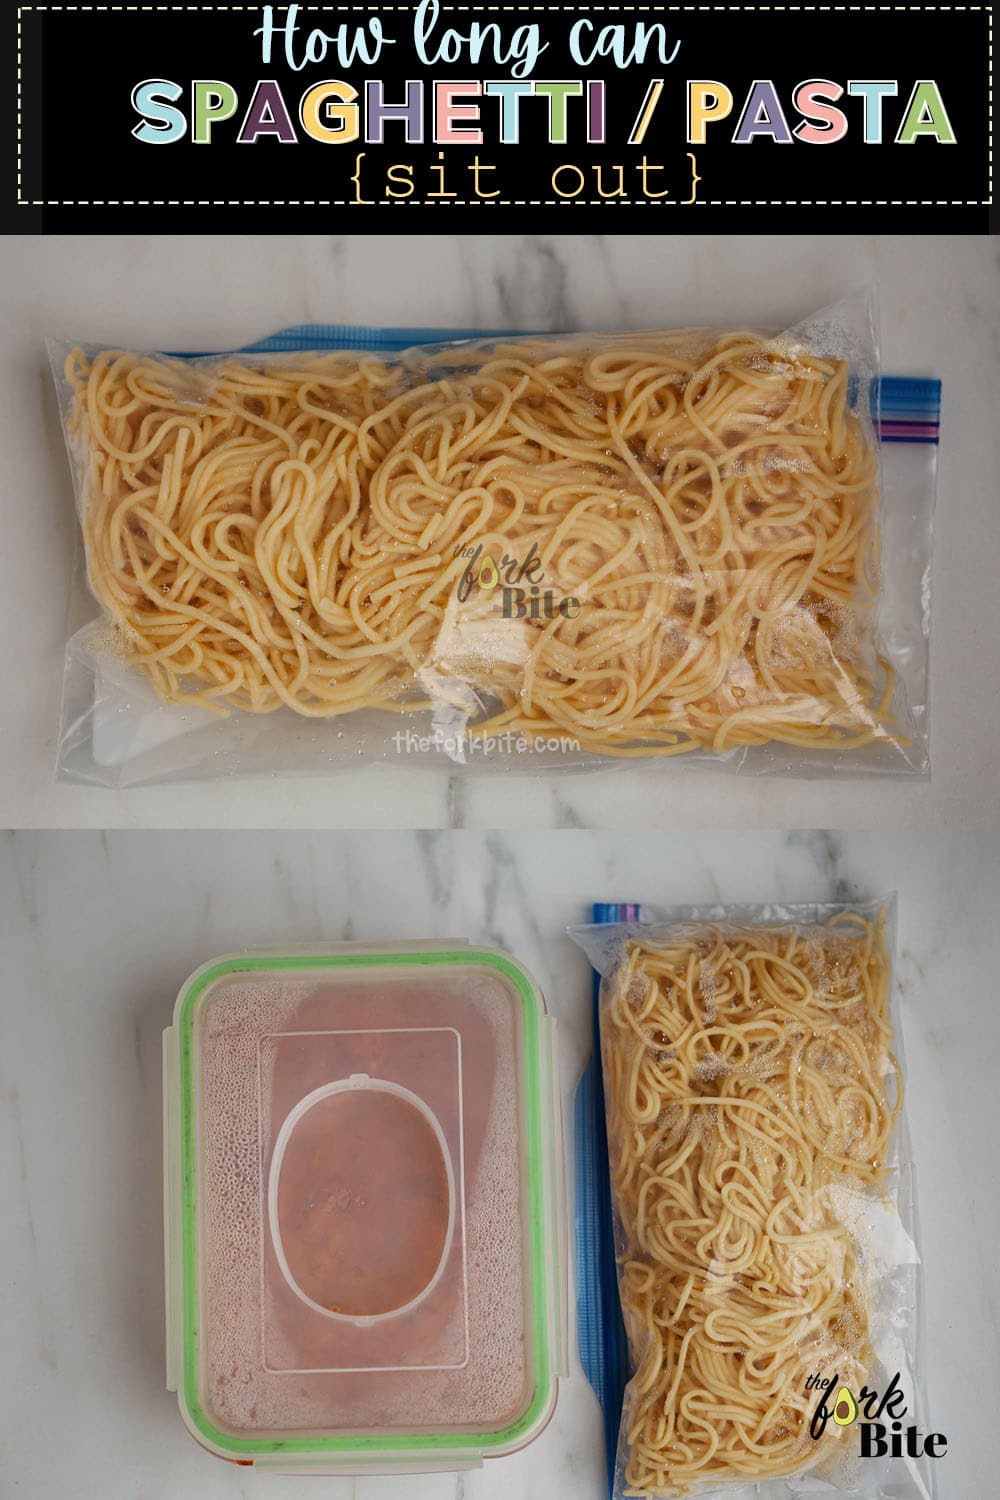 Whether cooked or not, fresh spaghetti should be refrigerated to keep it nice and fresh and to delay mold growth for as long as possible. You can generally keep most pasta in your fridge for between three and five days.